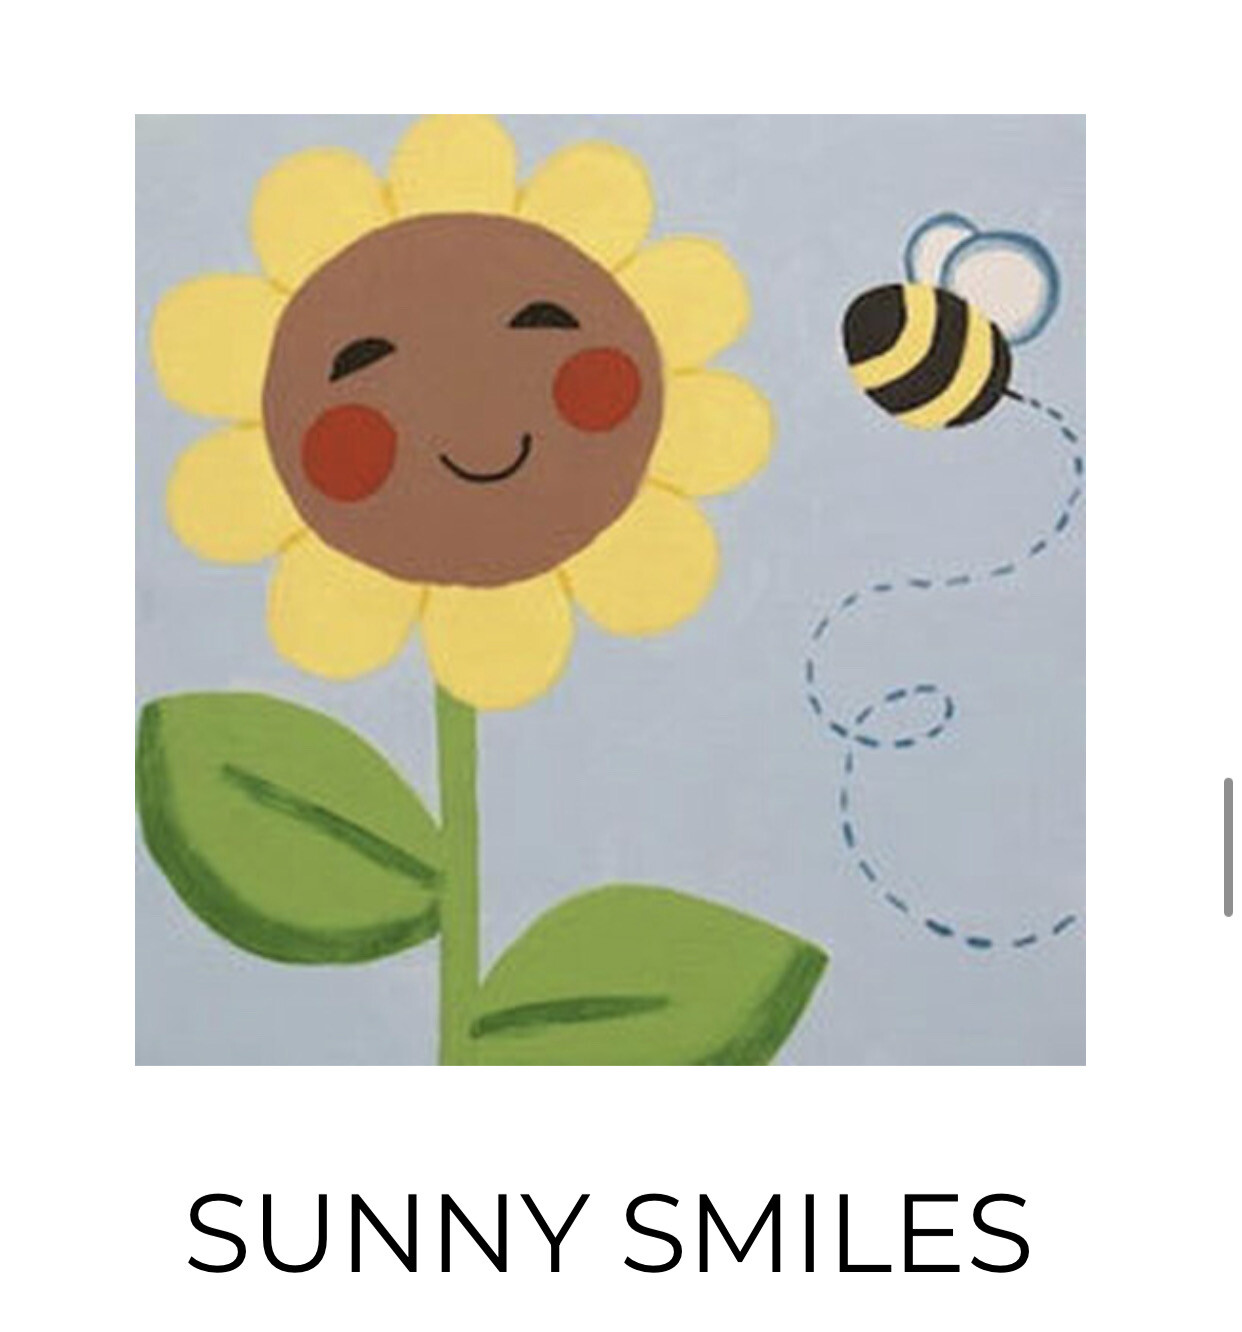 Sunny Smiles - KIDS Acrylic Paint On Canvas DIY Art Kit - 3 Week Special Order